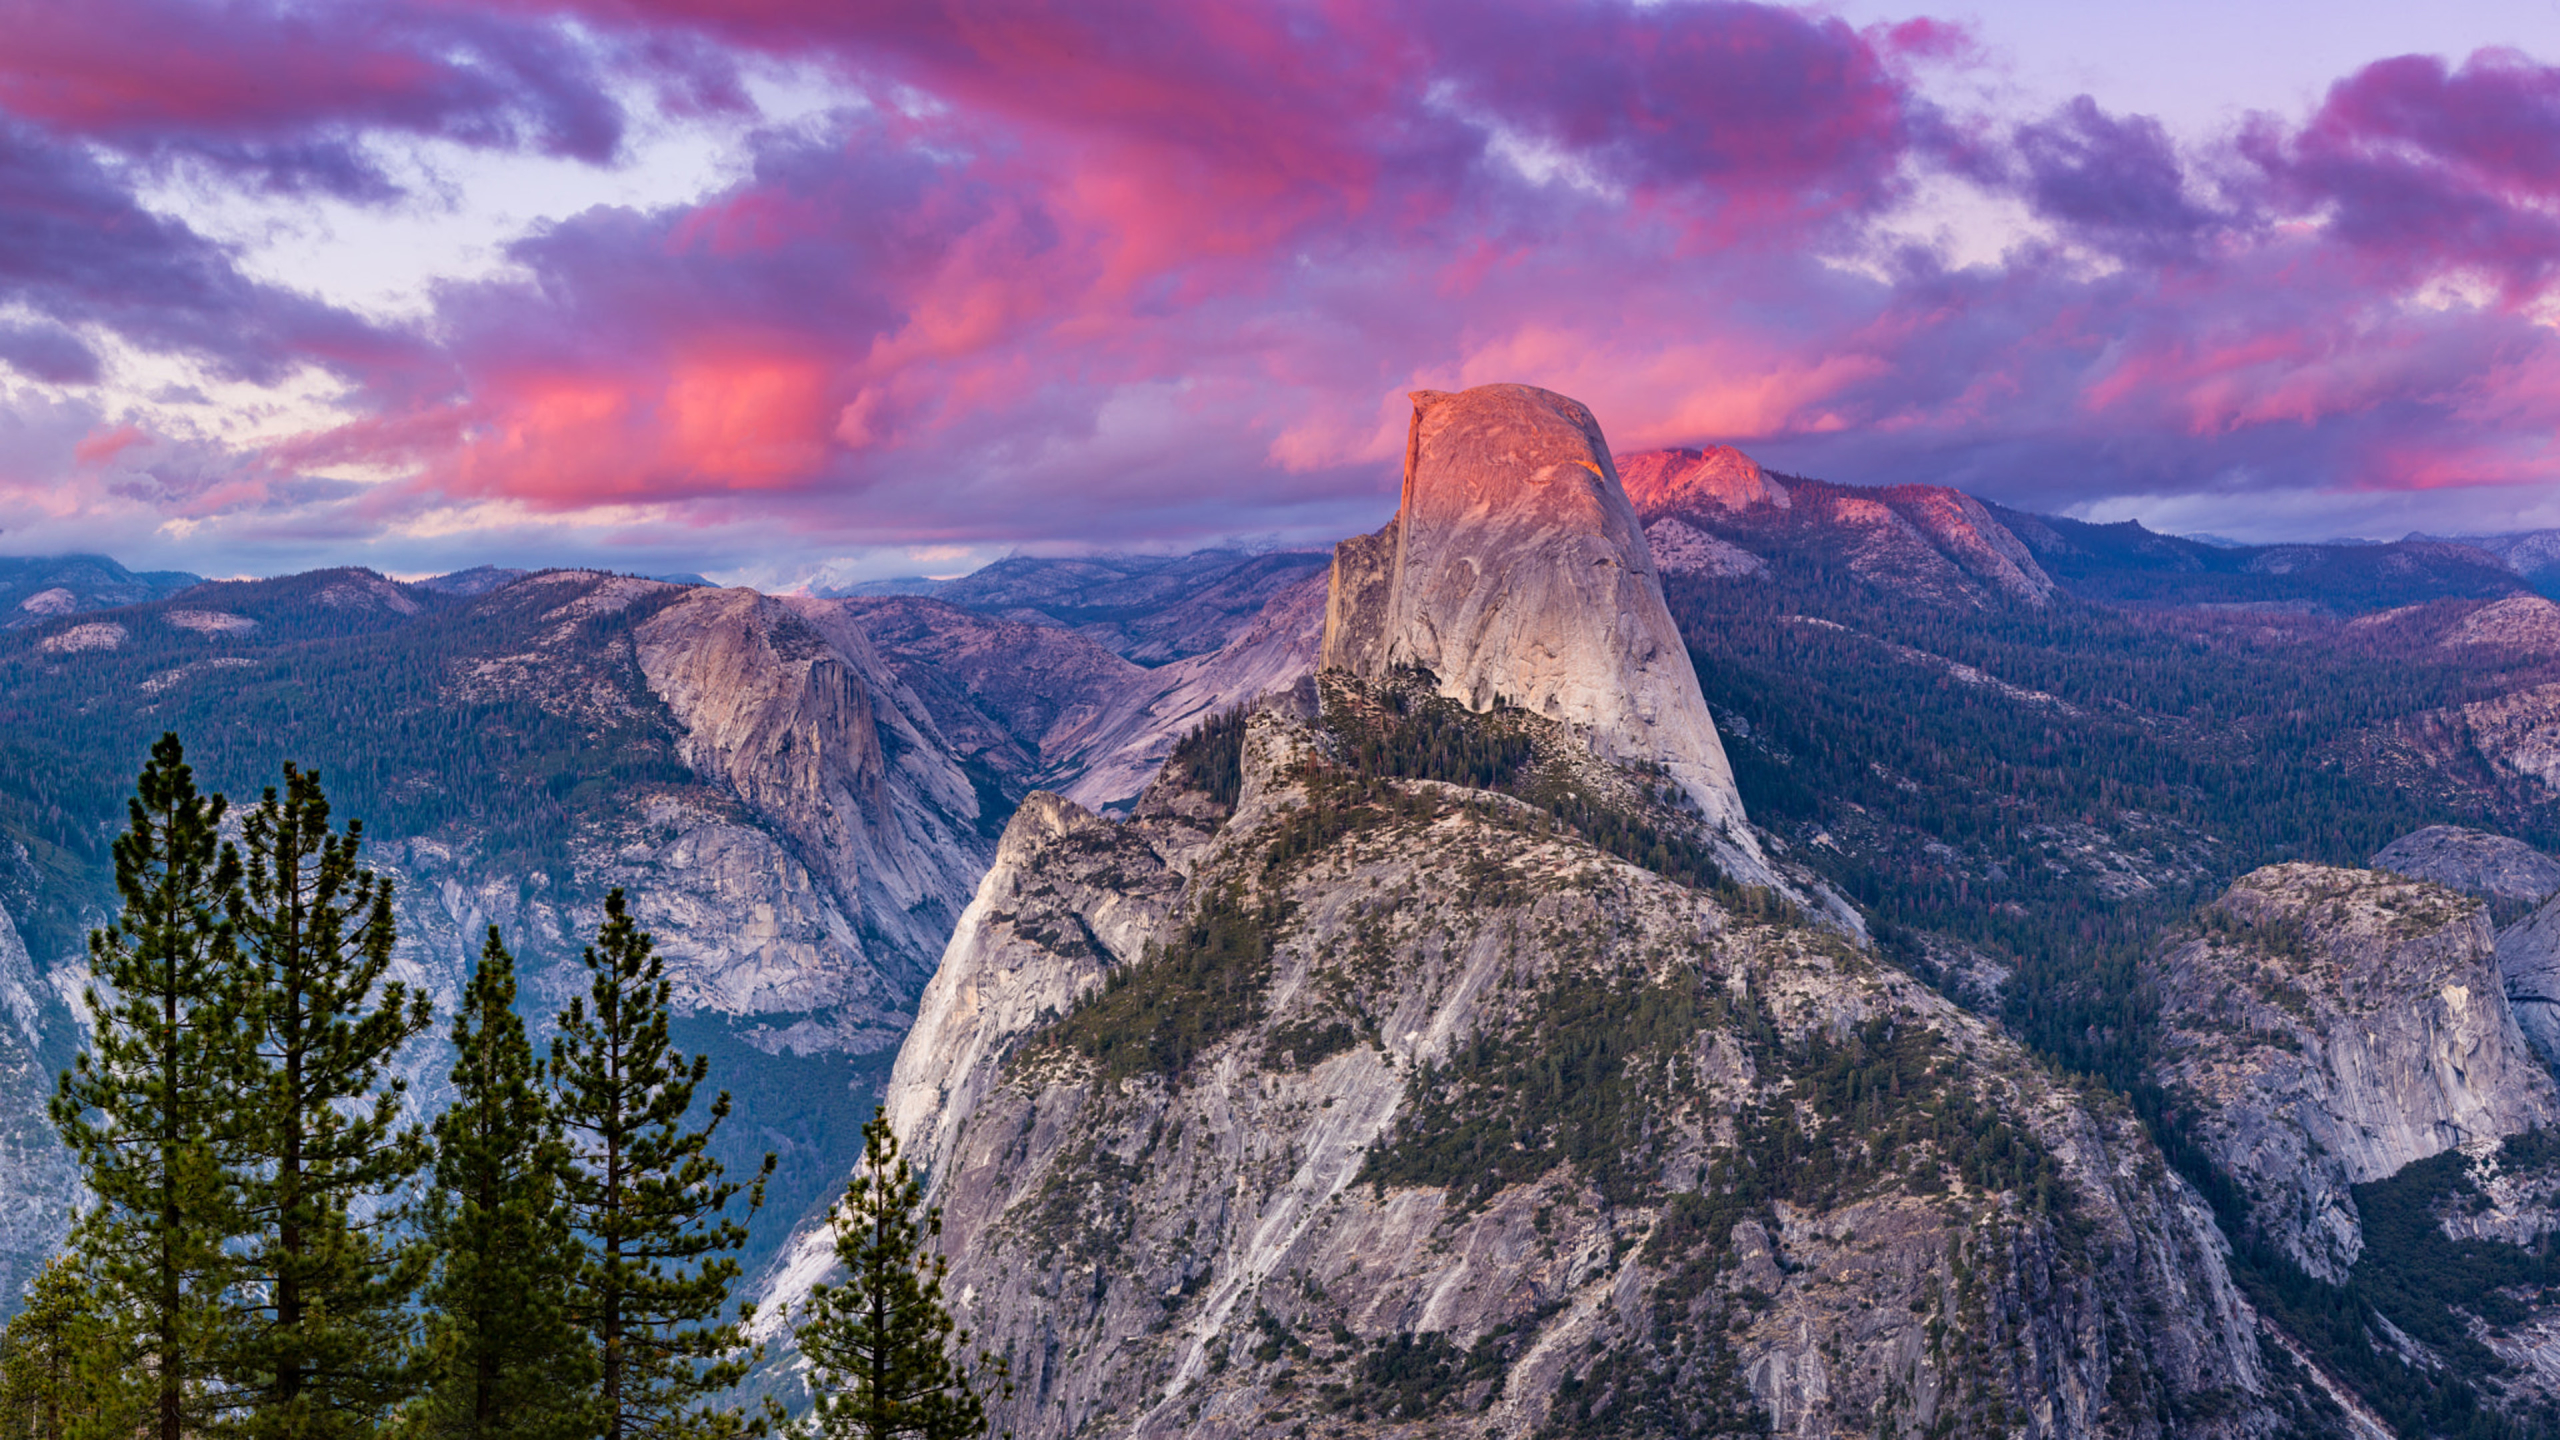 Sunset Over Half Dome In Yosemite National Park